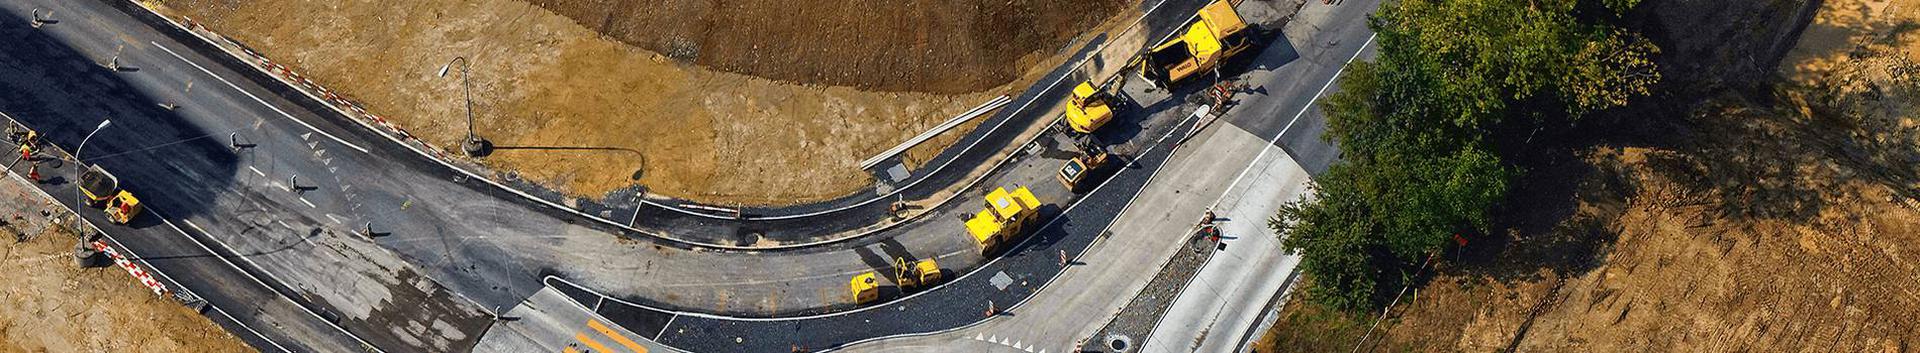 transport of snow, road and bridge construction, road construction, Road repair works, Engineering and engineering services, Construction site works, Road bed maintenance work, Road surface work, snow removal services, Construction